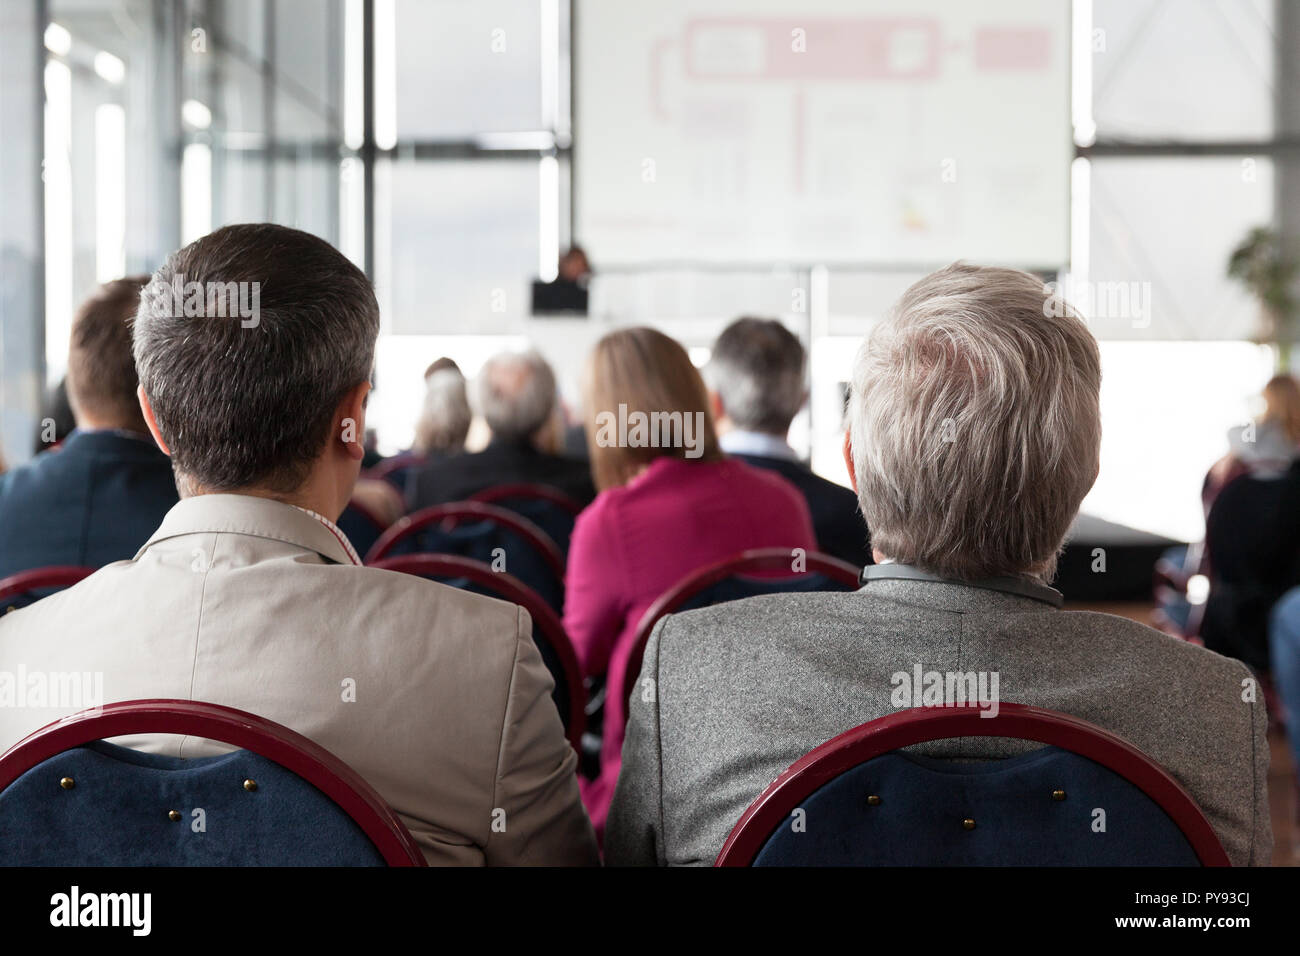 Participants at a professional or business conference listening speaker's presentation. Stock Photo